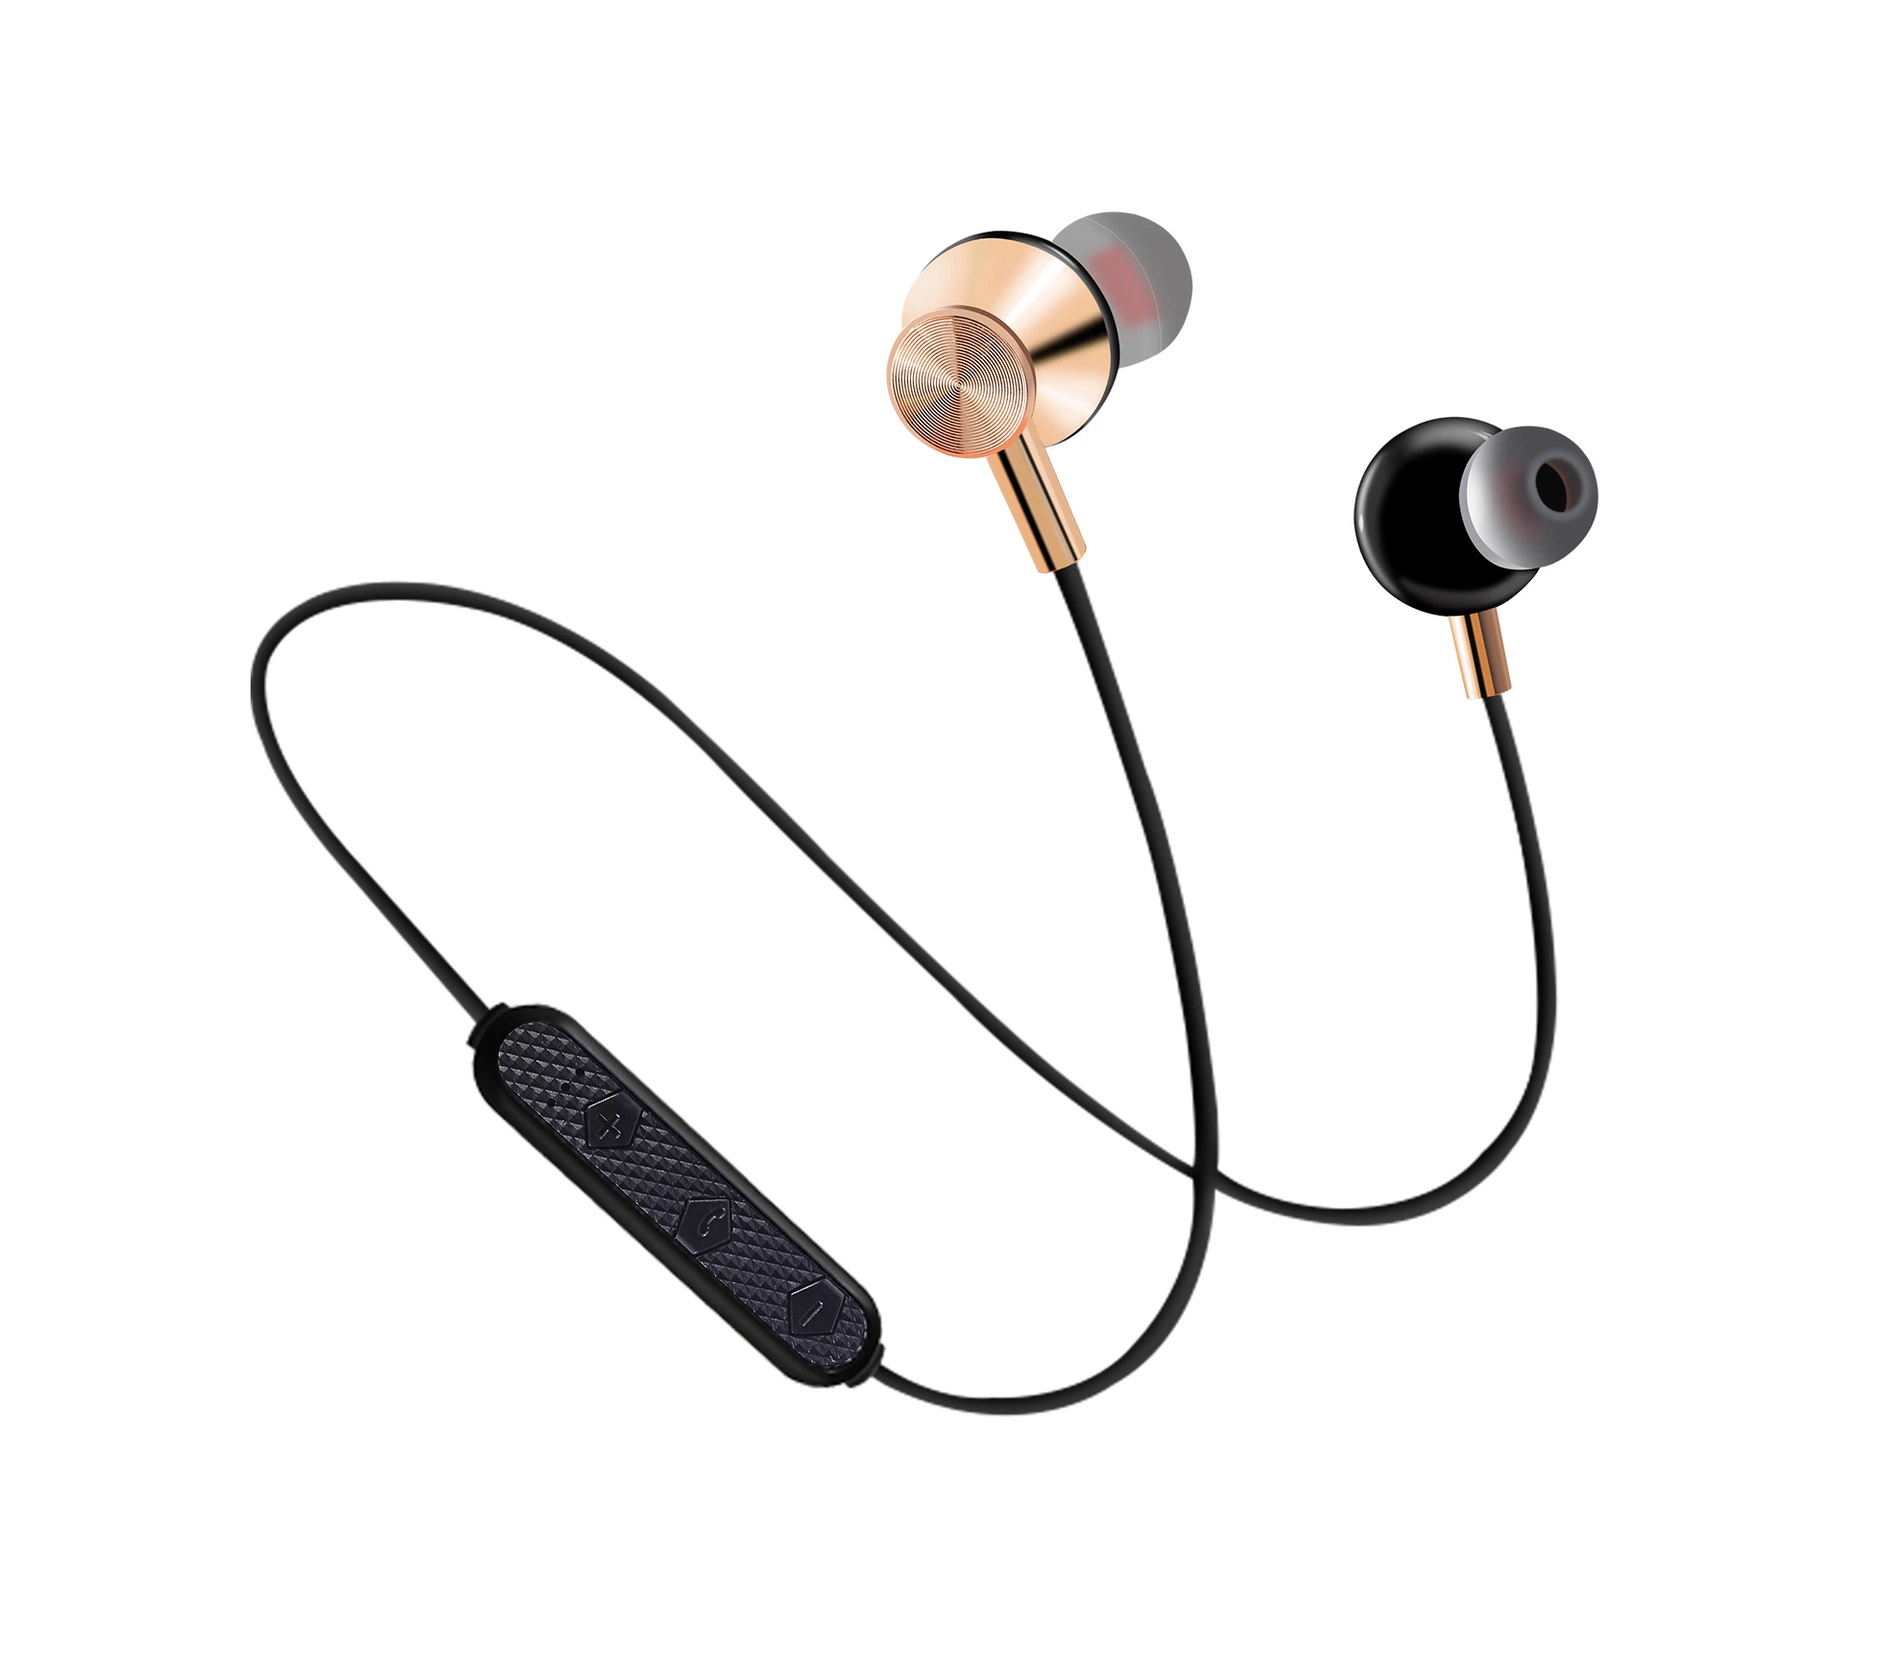 Bt V5.0 Mobile Phone in Ear Bluetooth Earbuds Earphone with Mic Wireless Headphone Headset